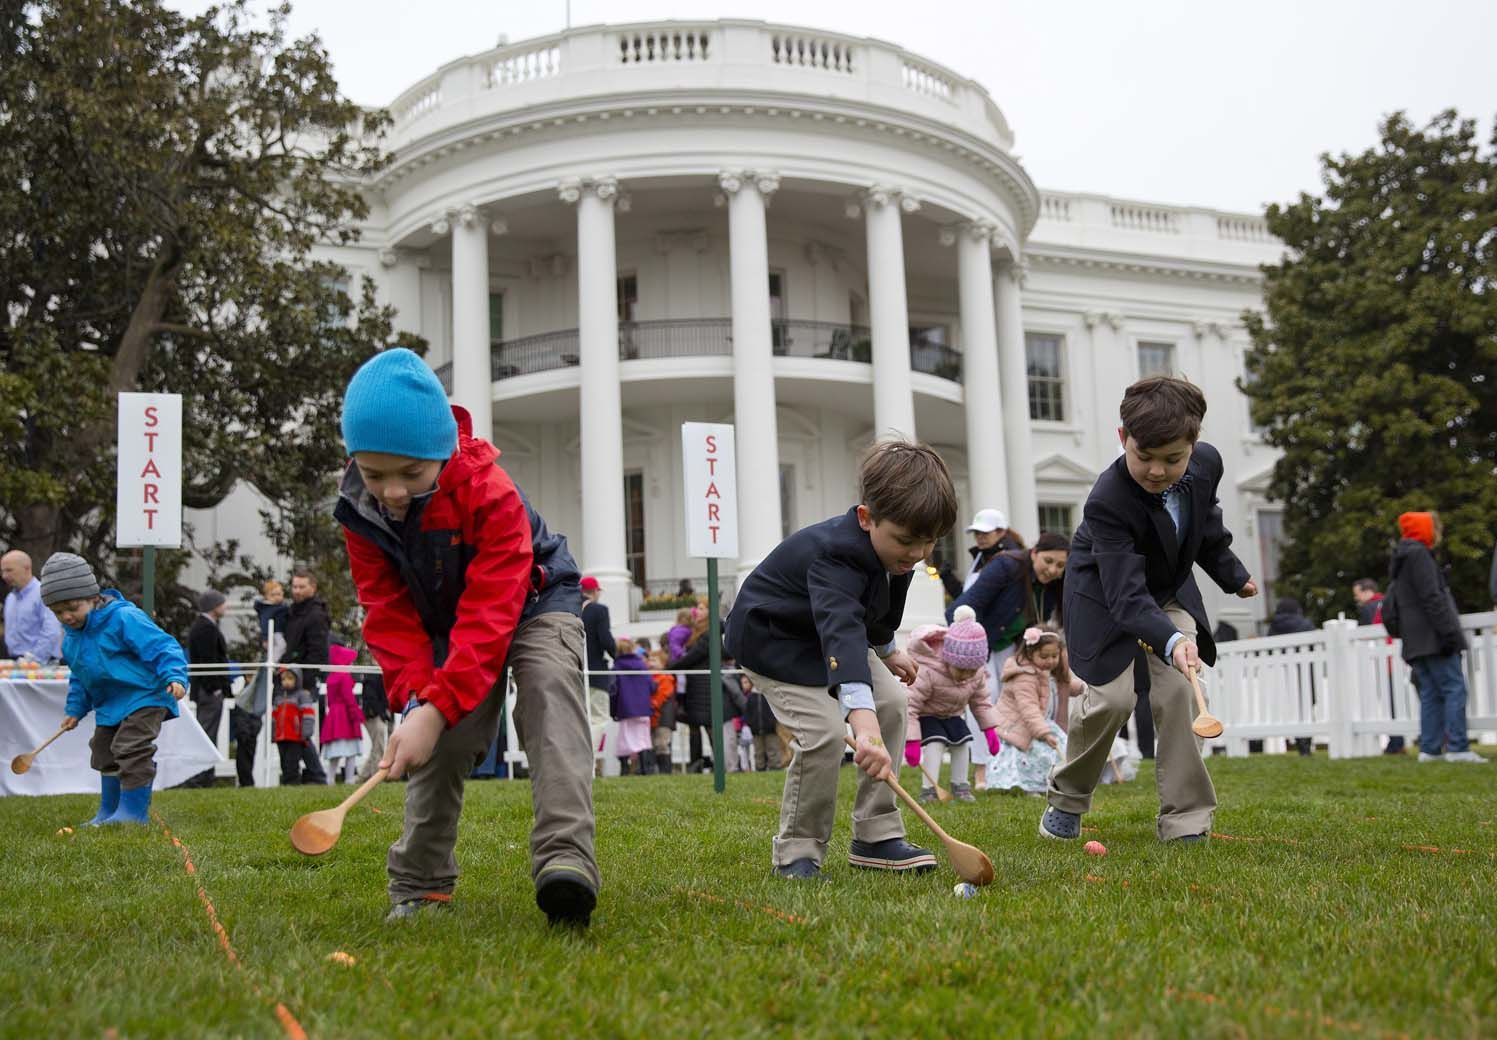 From l-r., Seamus Menefee, 7, from Burke, Va., Skye Kennedy, 5, and his brother Jack Kennedy, 8, both from Montclair, N.J., participates in the annual White House Easter Egg Roll on the South Lawn of the White House in Washington, Monday, April 2, 2018. (AP Photo/Pablo Martinez Monsivais)